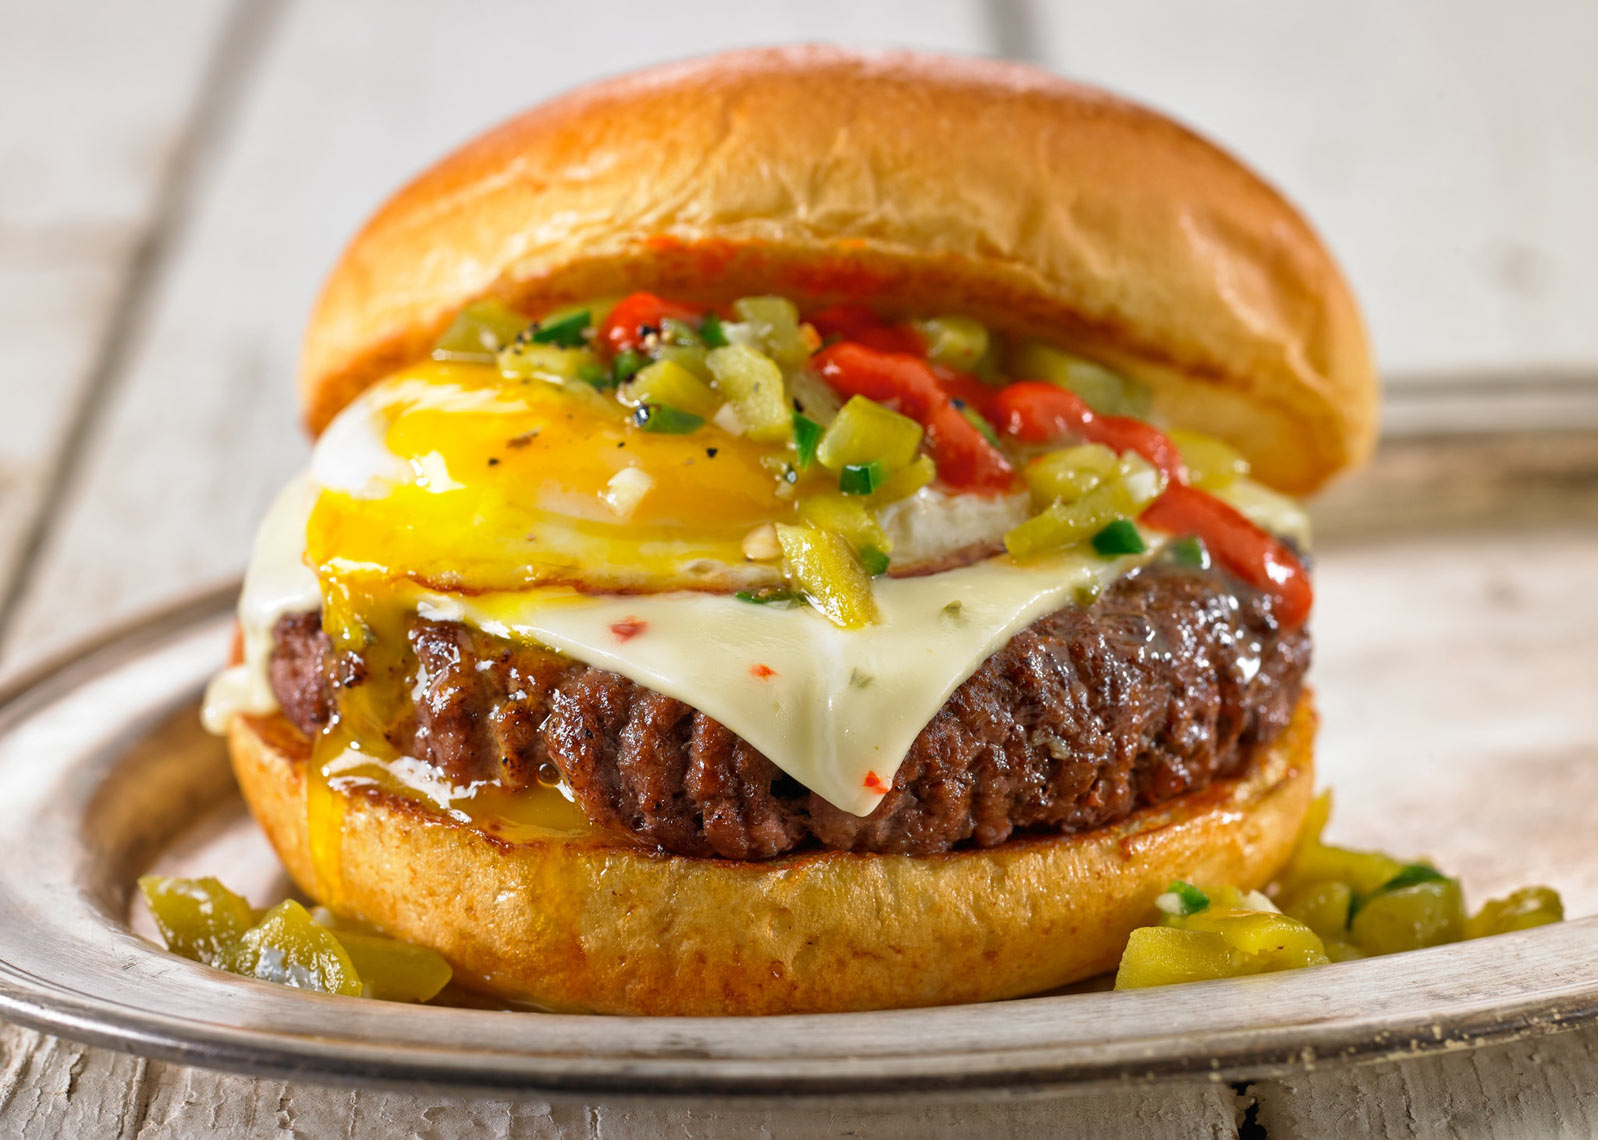 Big Cheeseburger/peppers/silver platter/egg/food photography